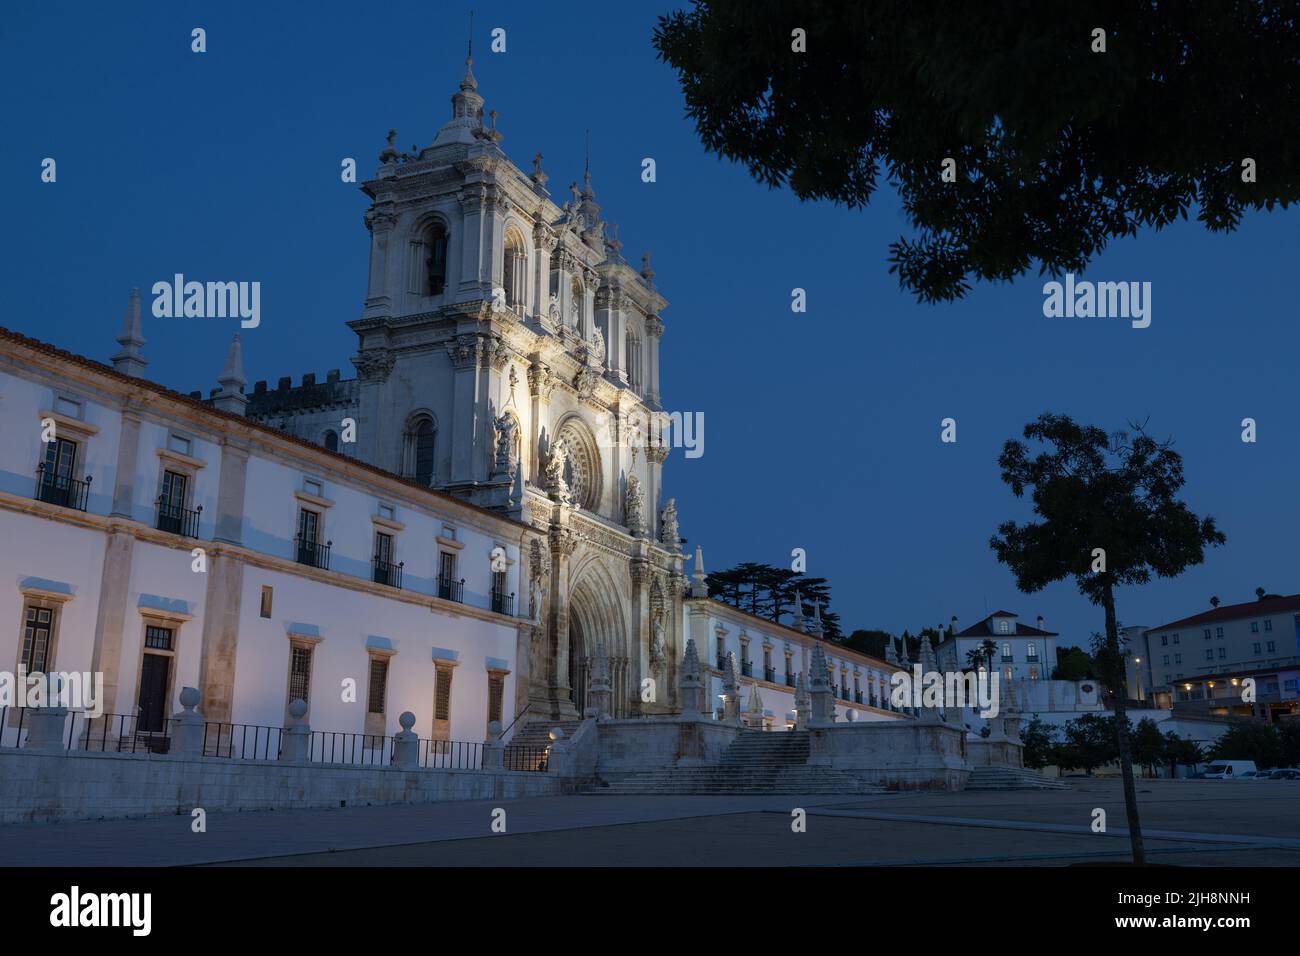 The monastery of Alcobaça, Portugal, during twilight / blue hour. Stock Photo